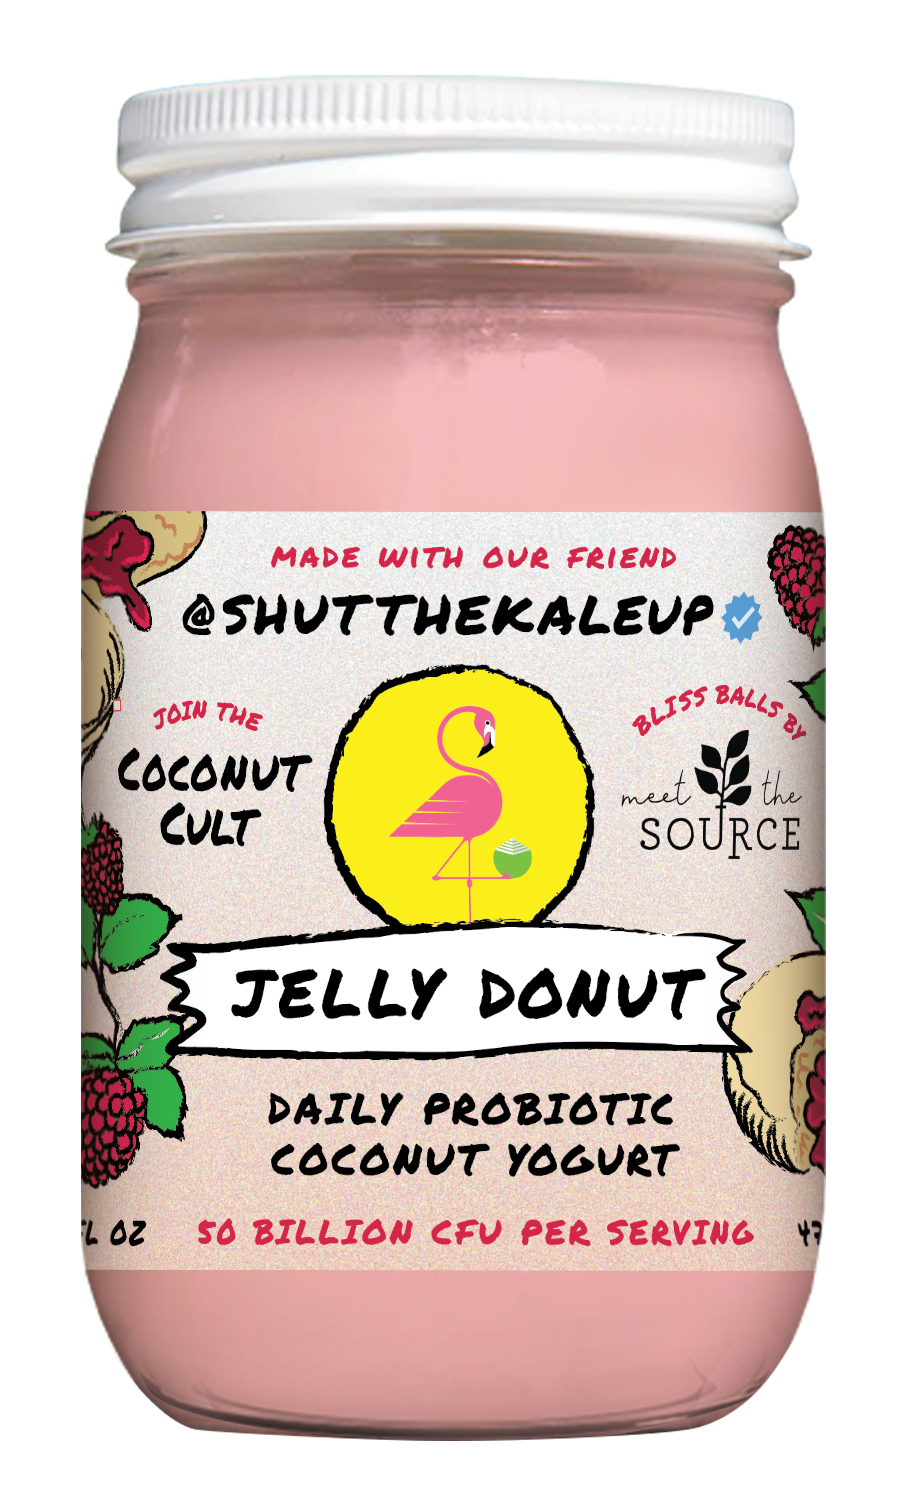 Jelly Donut - contains nuts